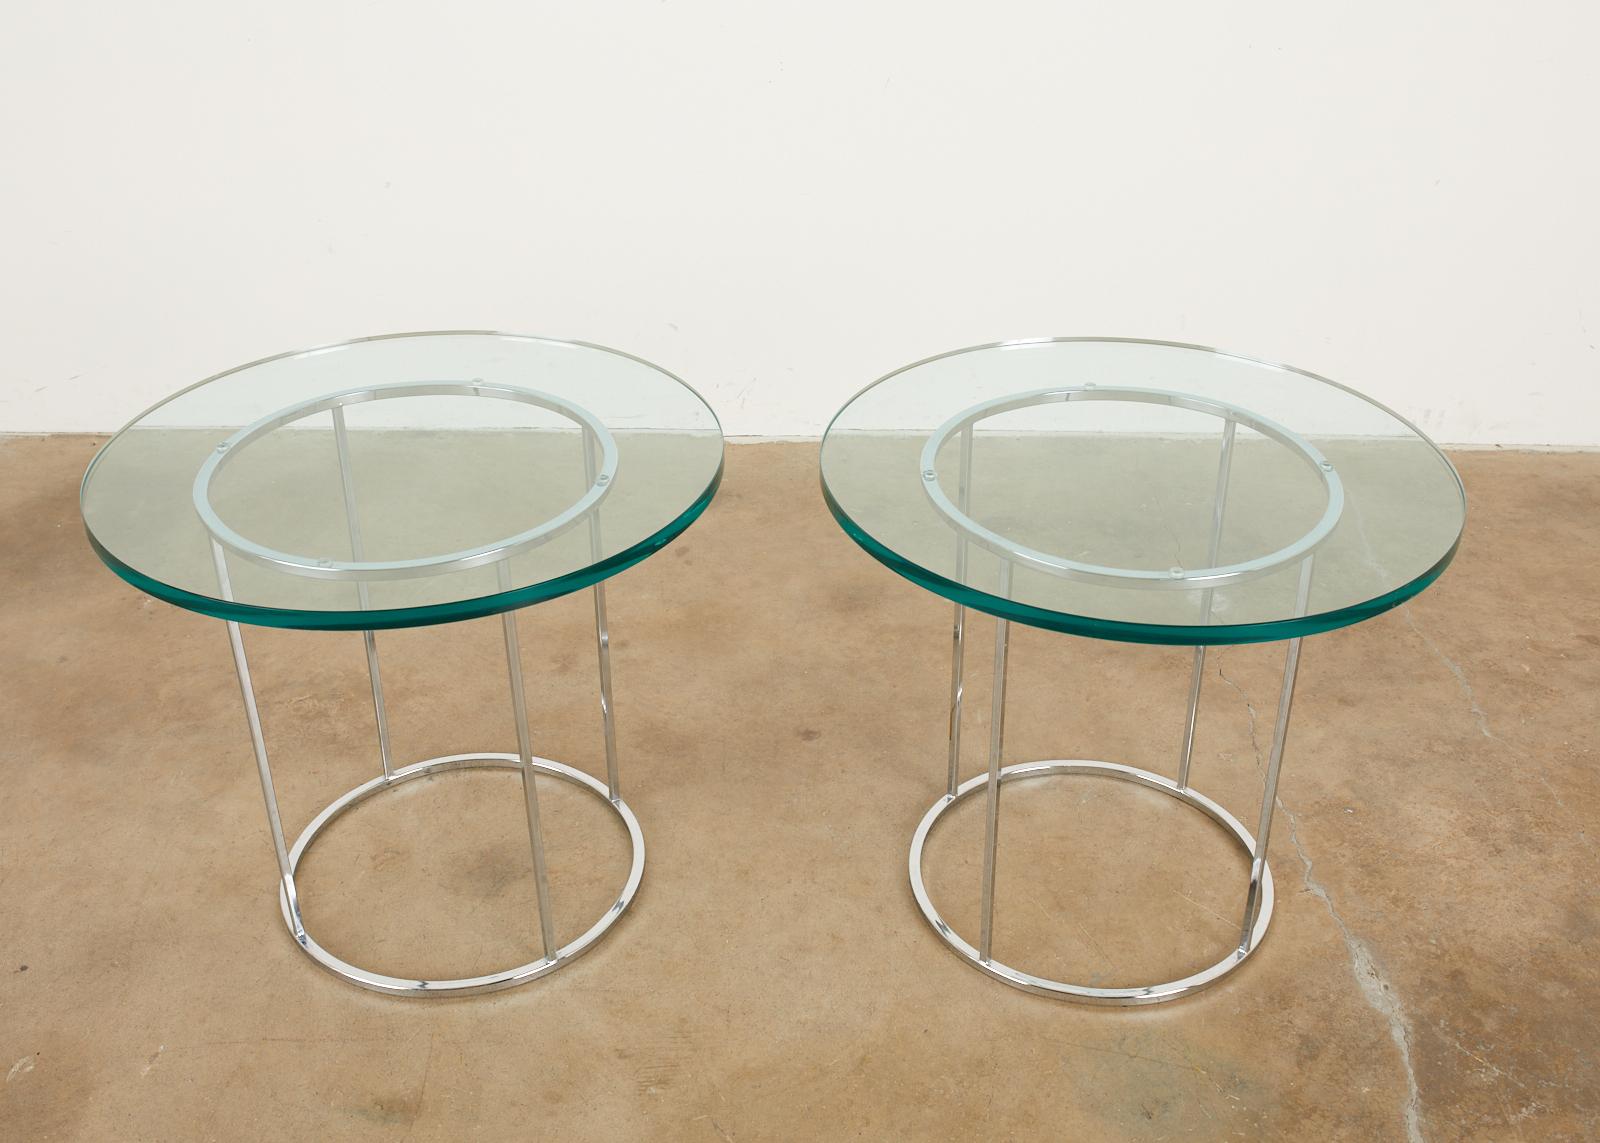 Stylish pair of mid-century modern chrome drinks tables attributed to Milo Baughman. The steel round frames feature Milo's iconic thin line profile design with a lovely chrome finish. Topped with thick round panes of glass. From an estate in